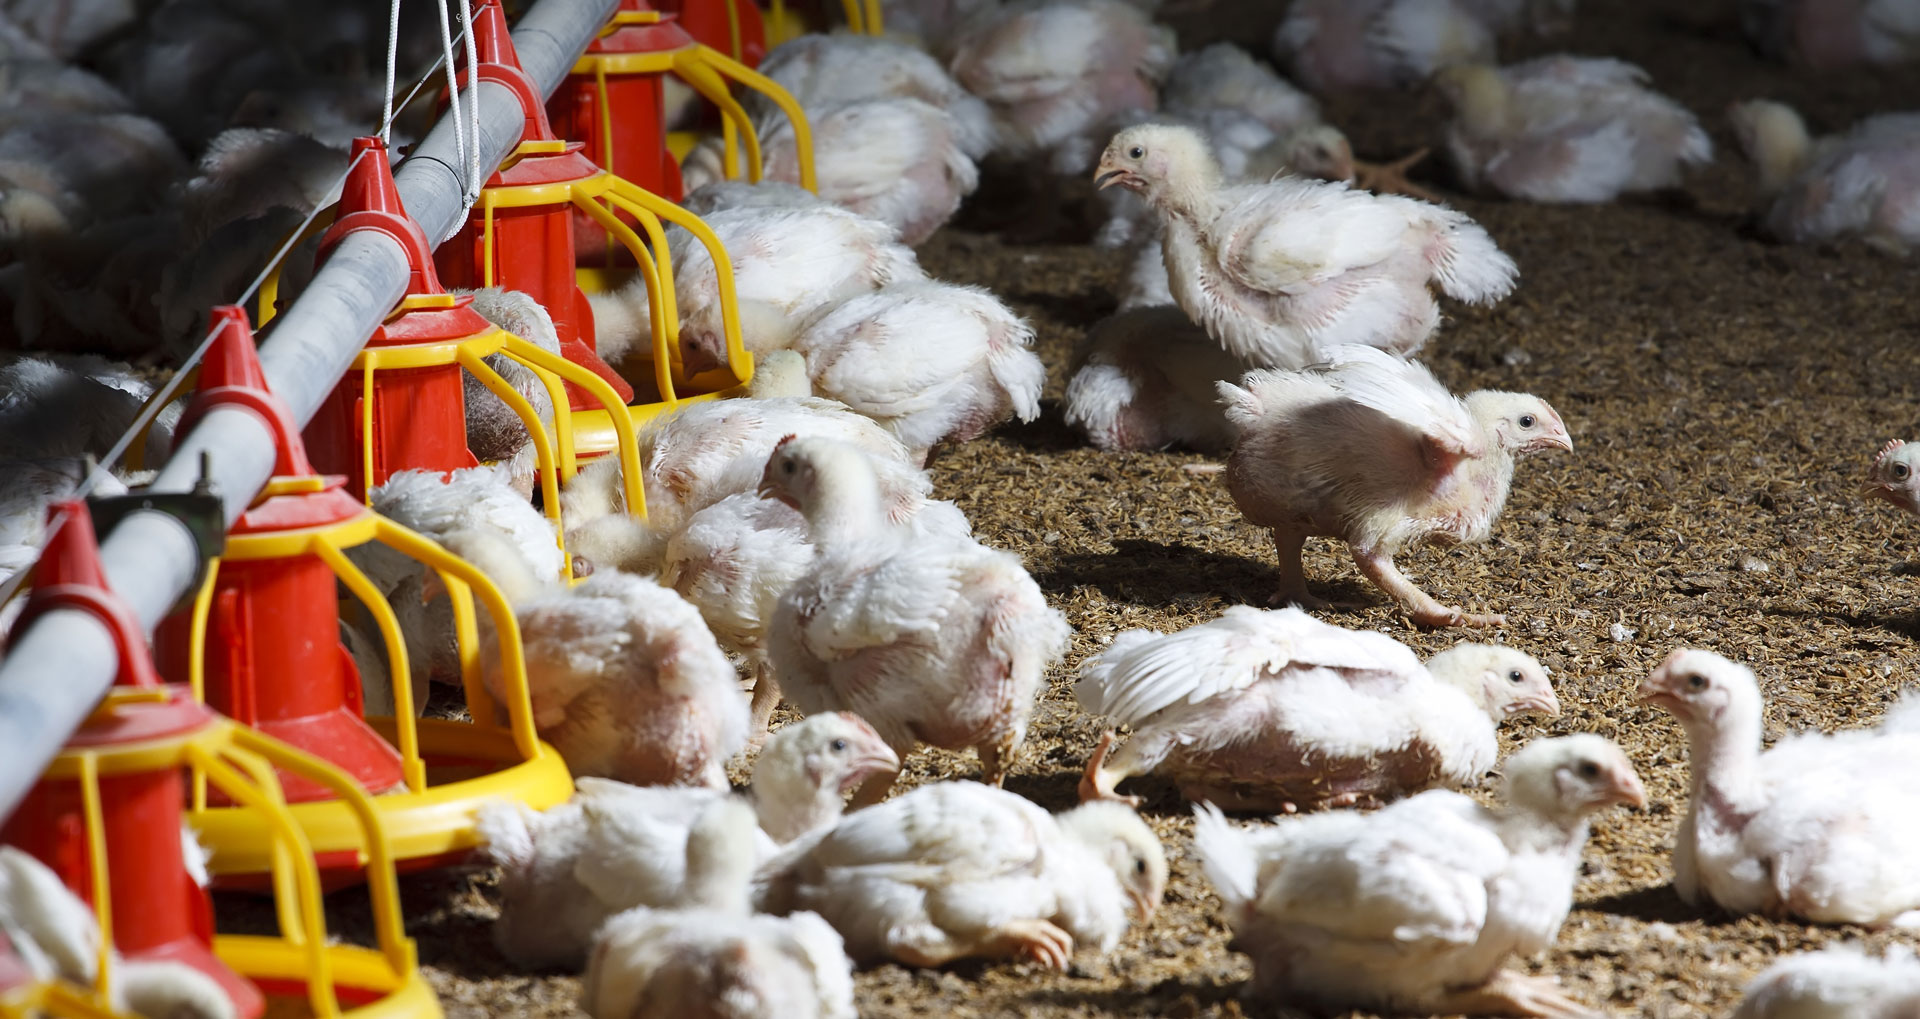 ag-gag laws prevent employees from reporting on poor conditions